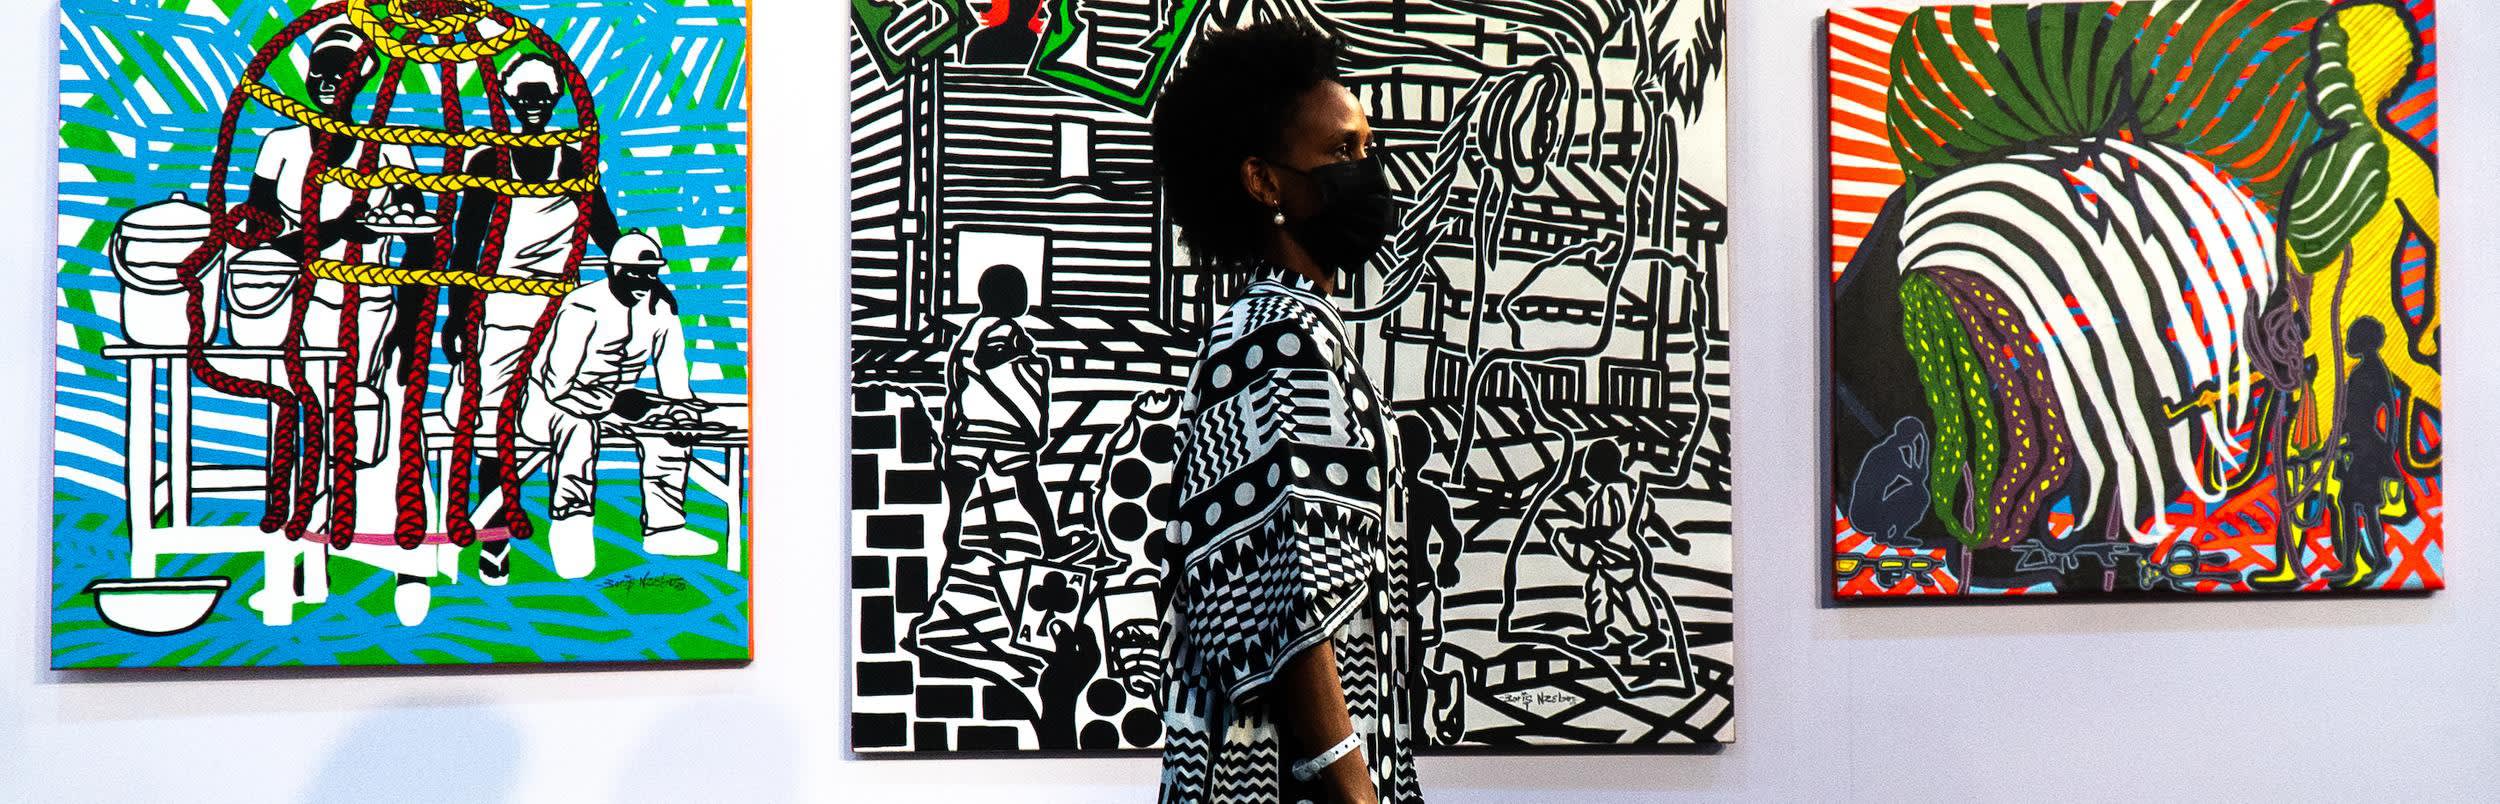 guest interacting with art at Art X Lagos